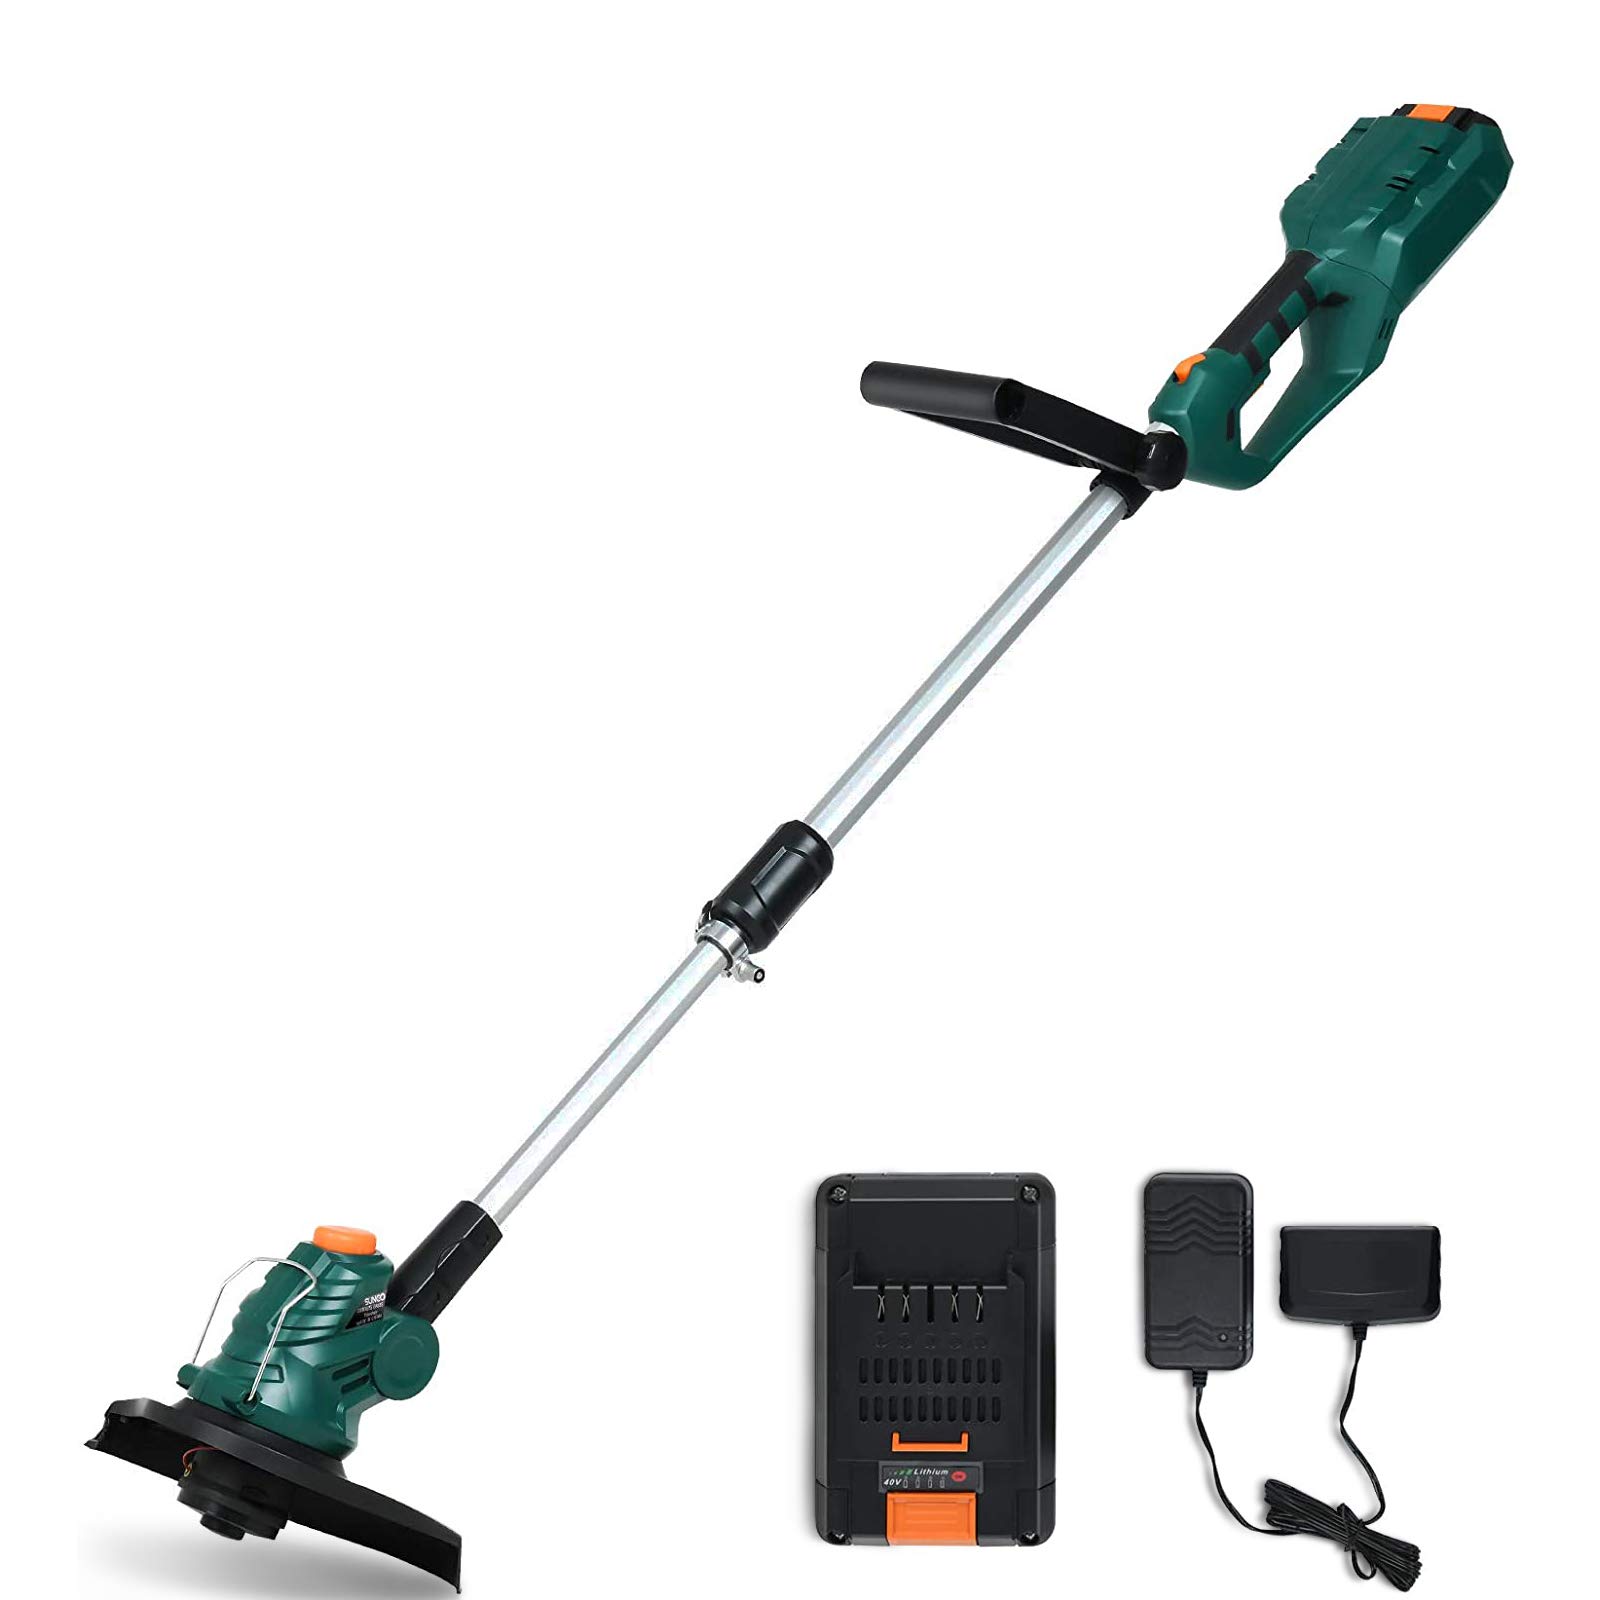 SUNCOO 12-Inch Cordless String Trimmer Edger, 40V 4Ah Telescoping Lawn Grass Trimmers Edgers, Electric Battery Powered, 2-in-1 Convertible Auto Feed Strimmer w/Battery & Charger - image 1 of 6